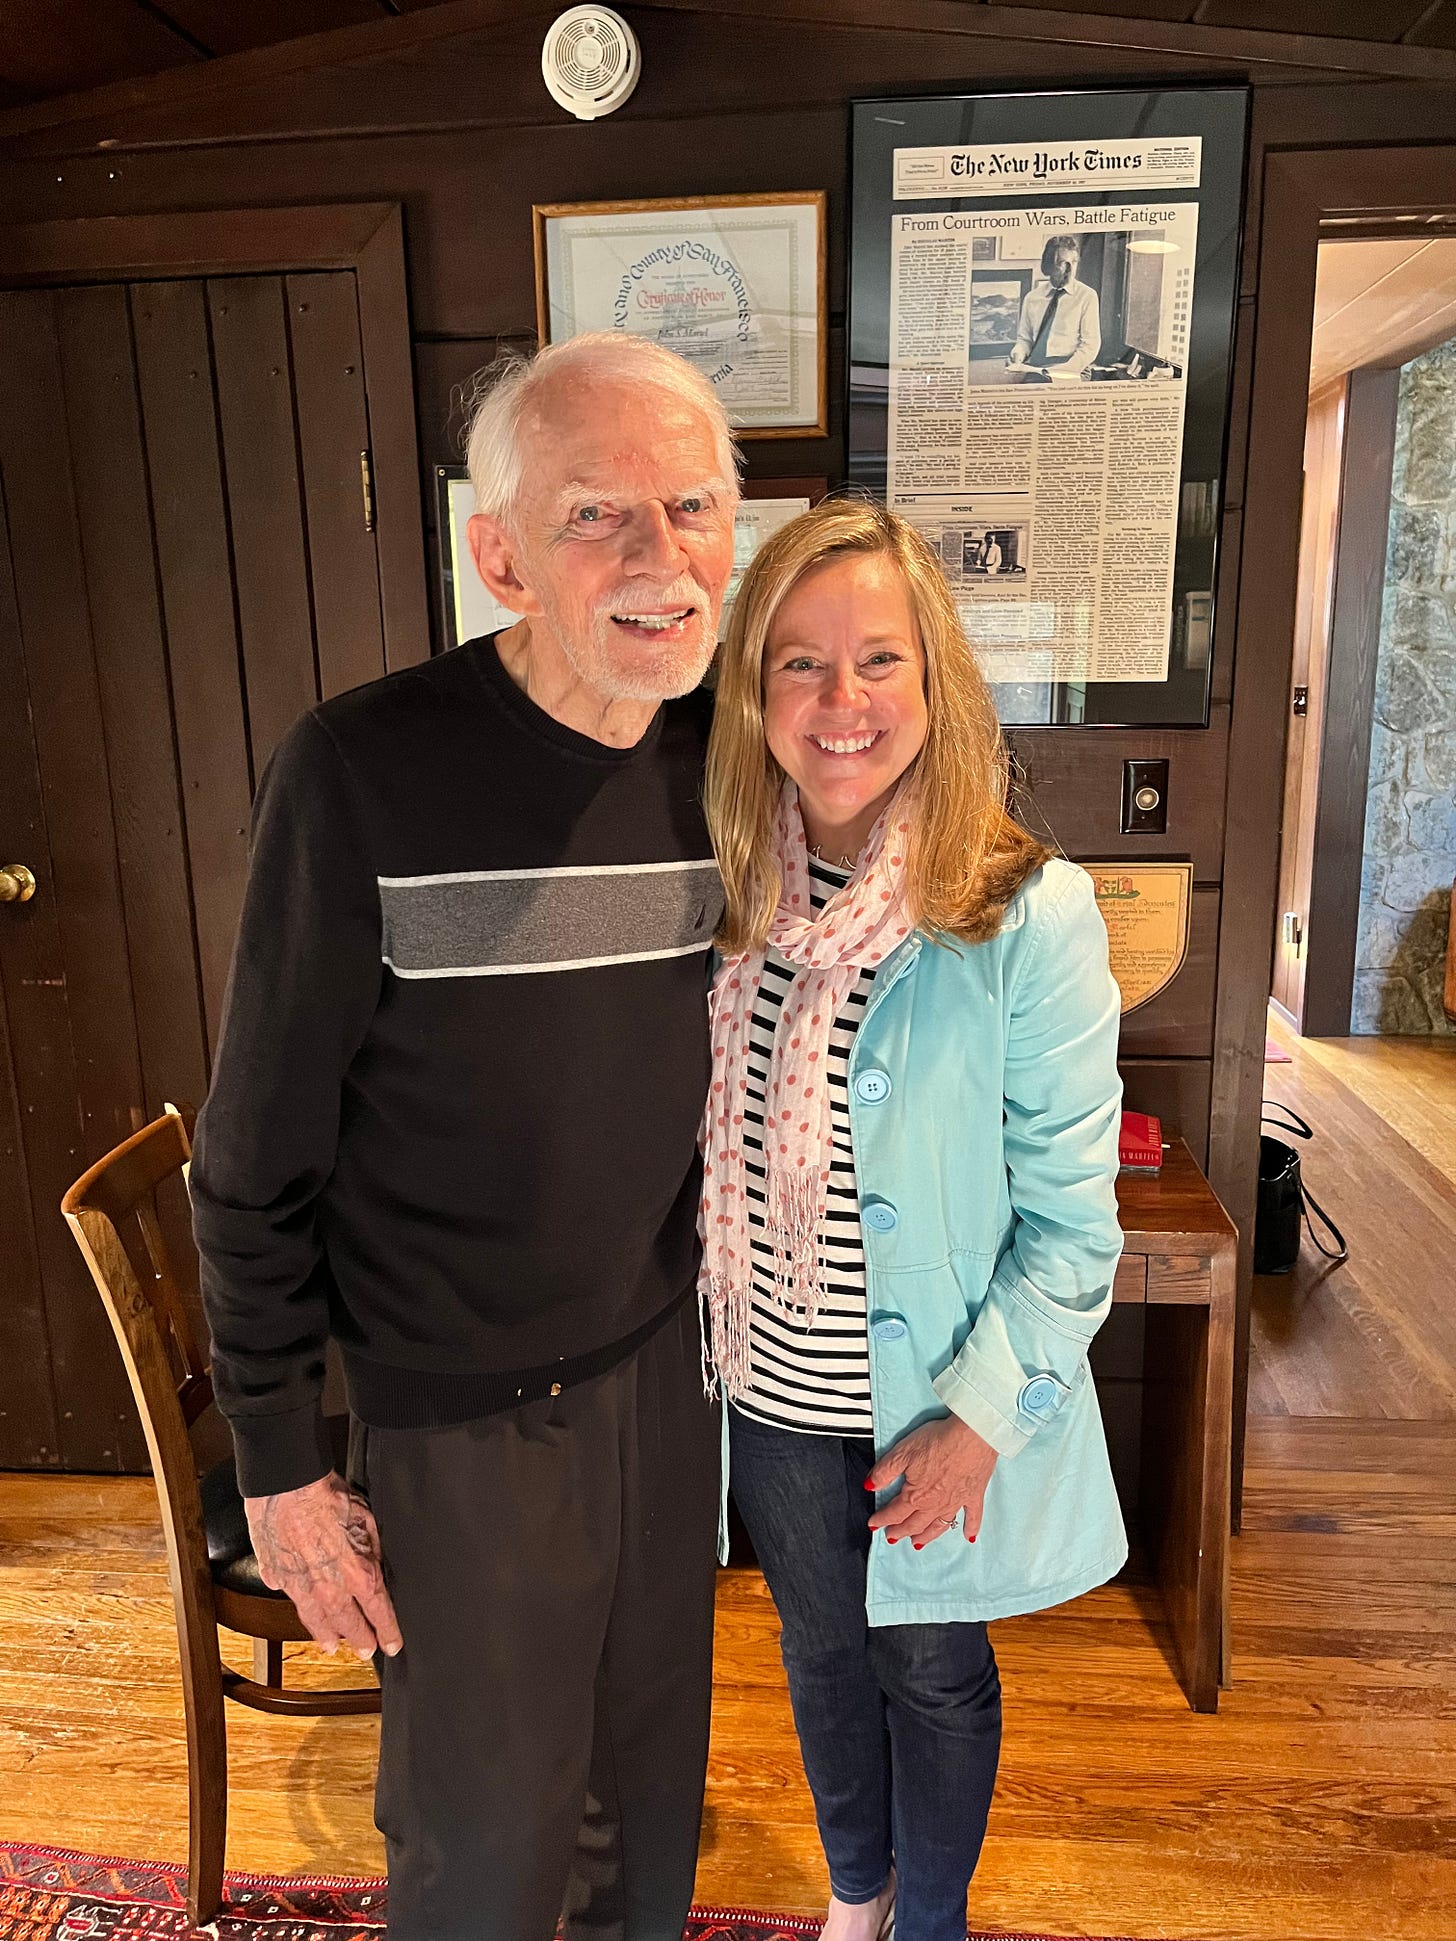 An elderly man and a middle aged woman stand in a wood paneled office in front of framed news clippings and photographs. The man is author John Martel, and the woman is memoir-writing coach and developmental editor Christine Wolf